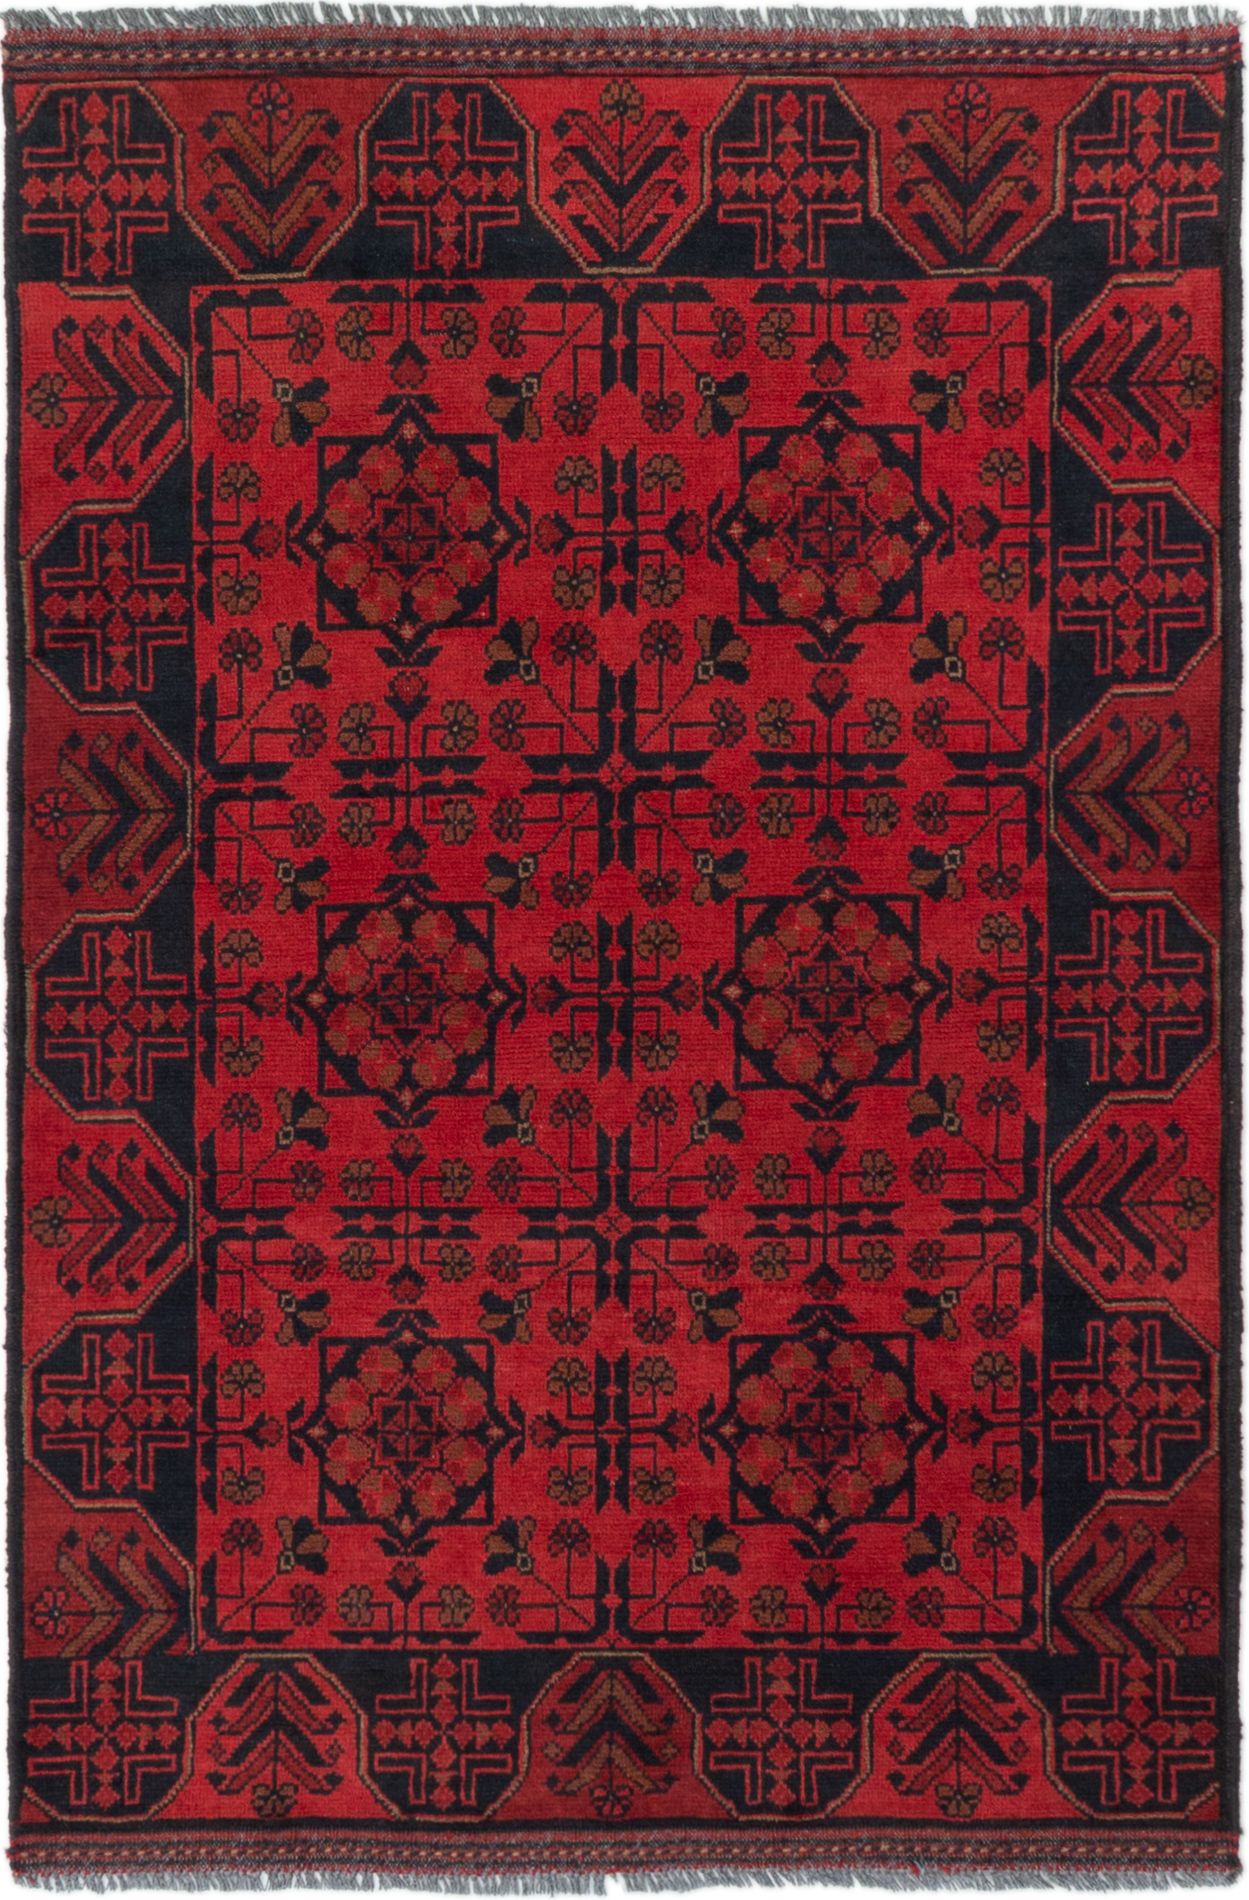 Hand-knotted Finest Khal Mohammadi Red Wool Rug 3'4" x 4'11" (27) Size: 3'4" x 4'11"  